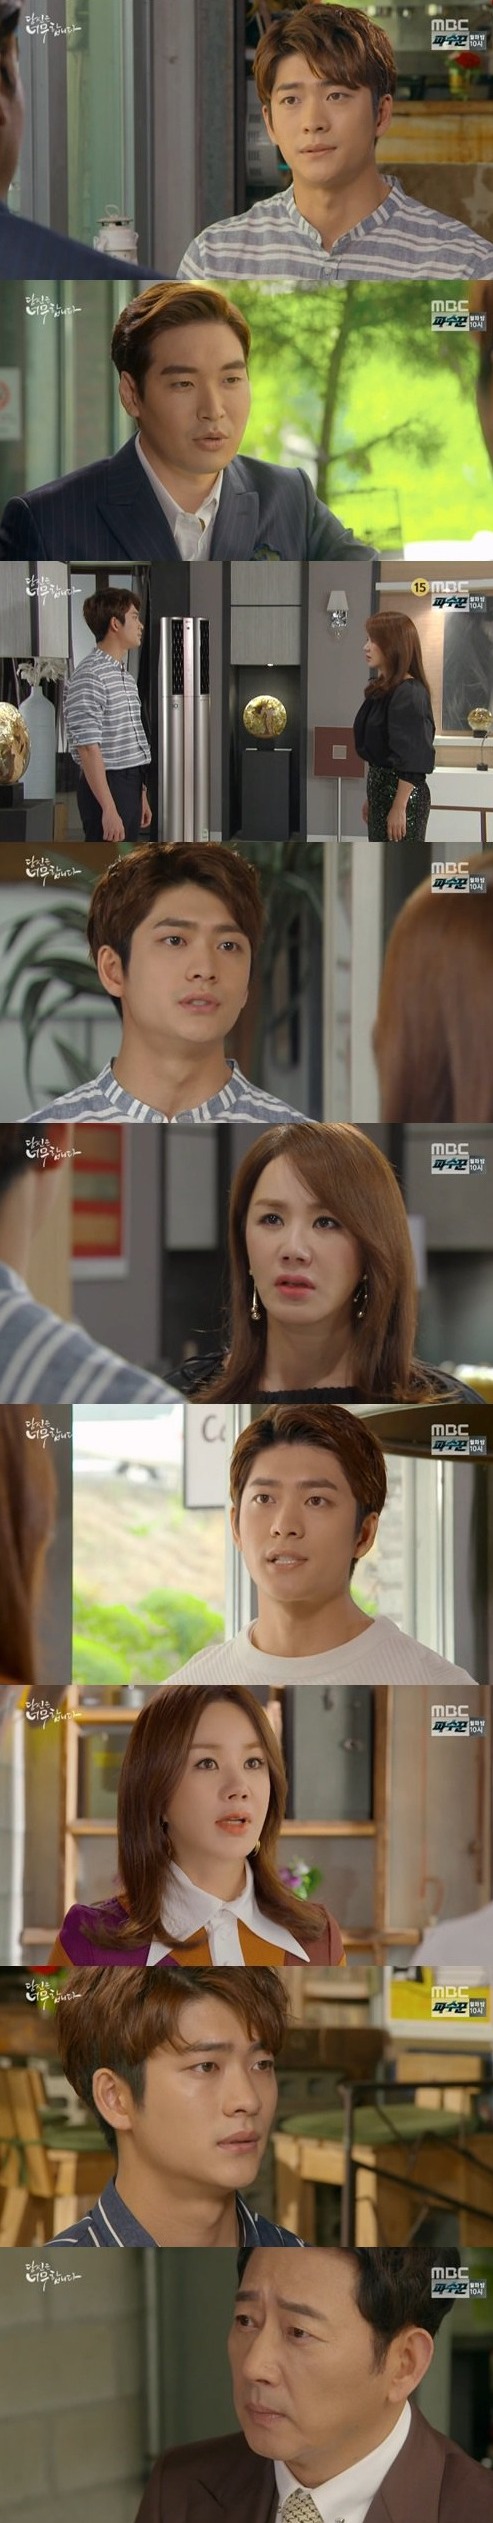 episodes 23 and 24 captures for the Korean drama 'You're Too Much'